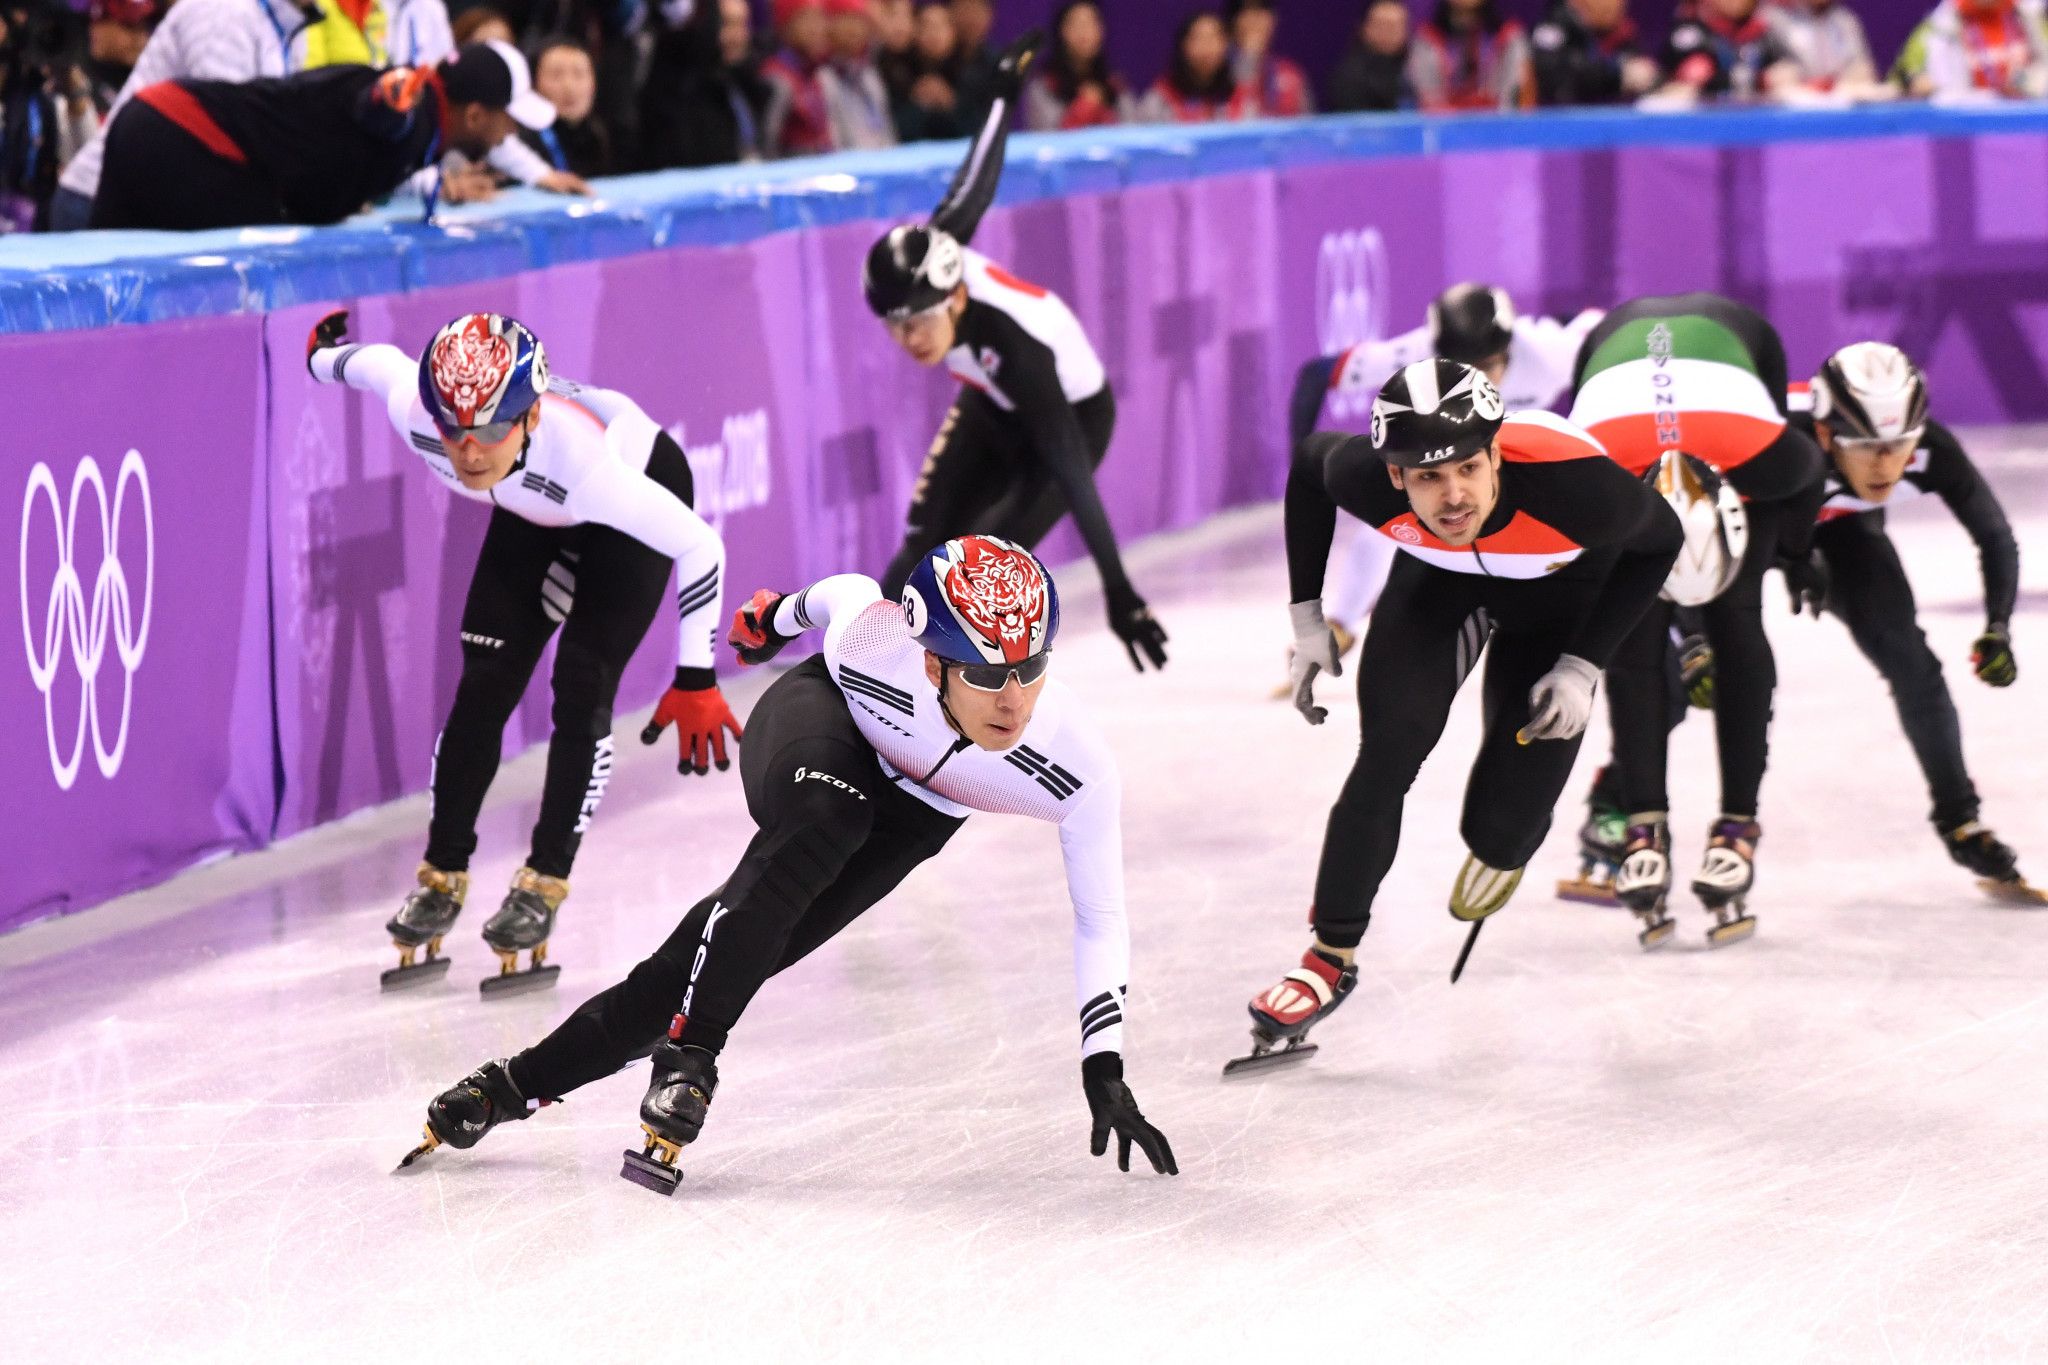 There were thrills and spills in the short-track speed skating relay today ©Getty Images